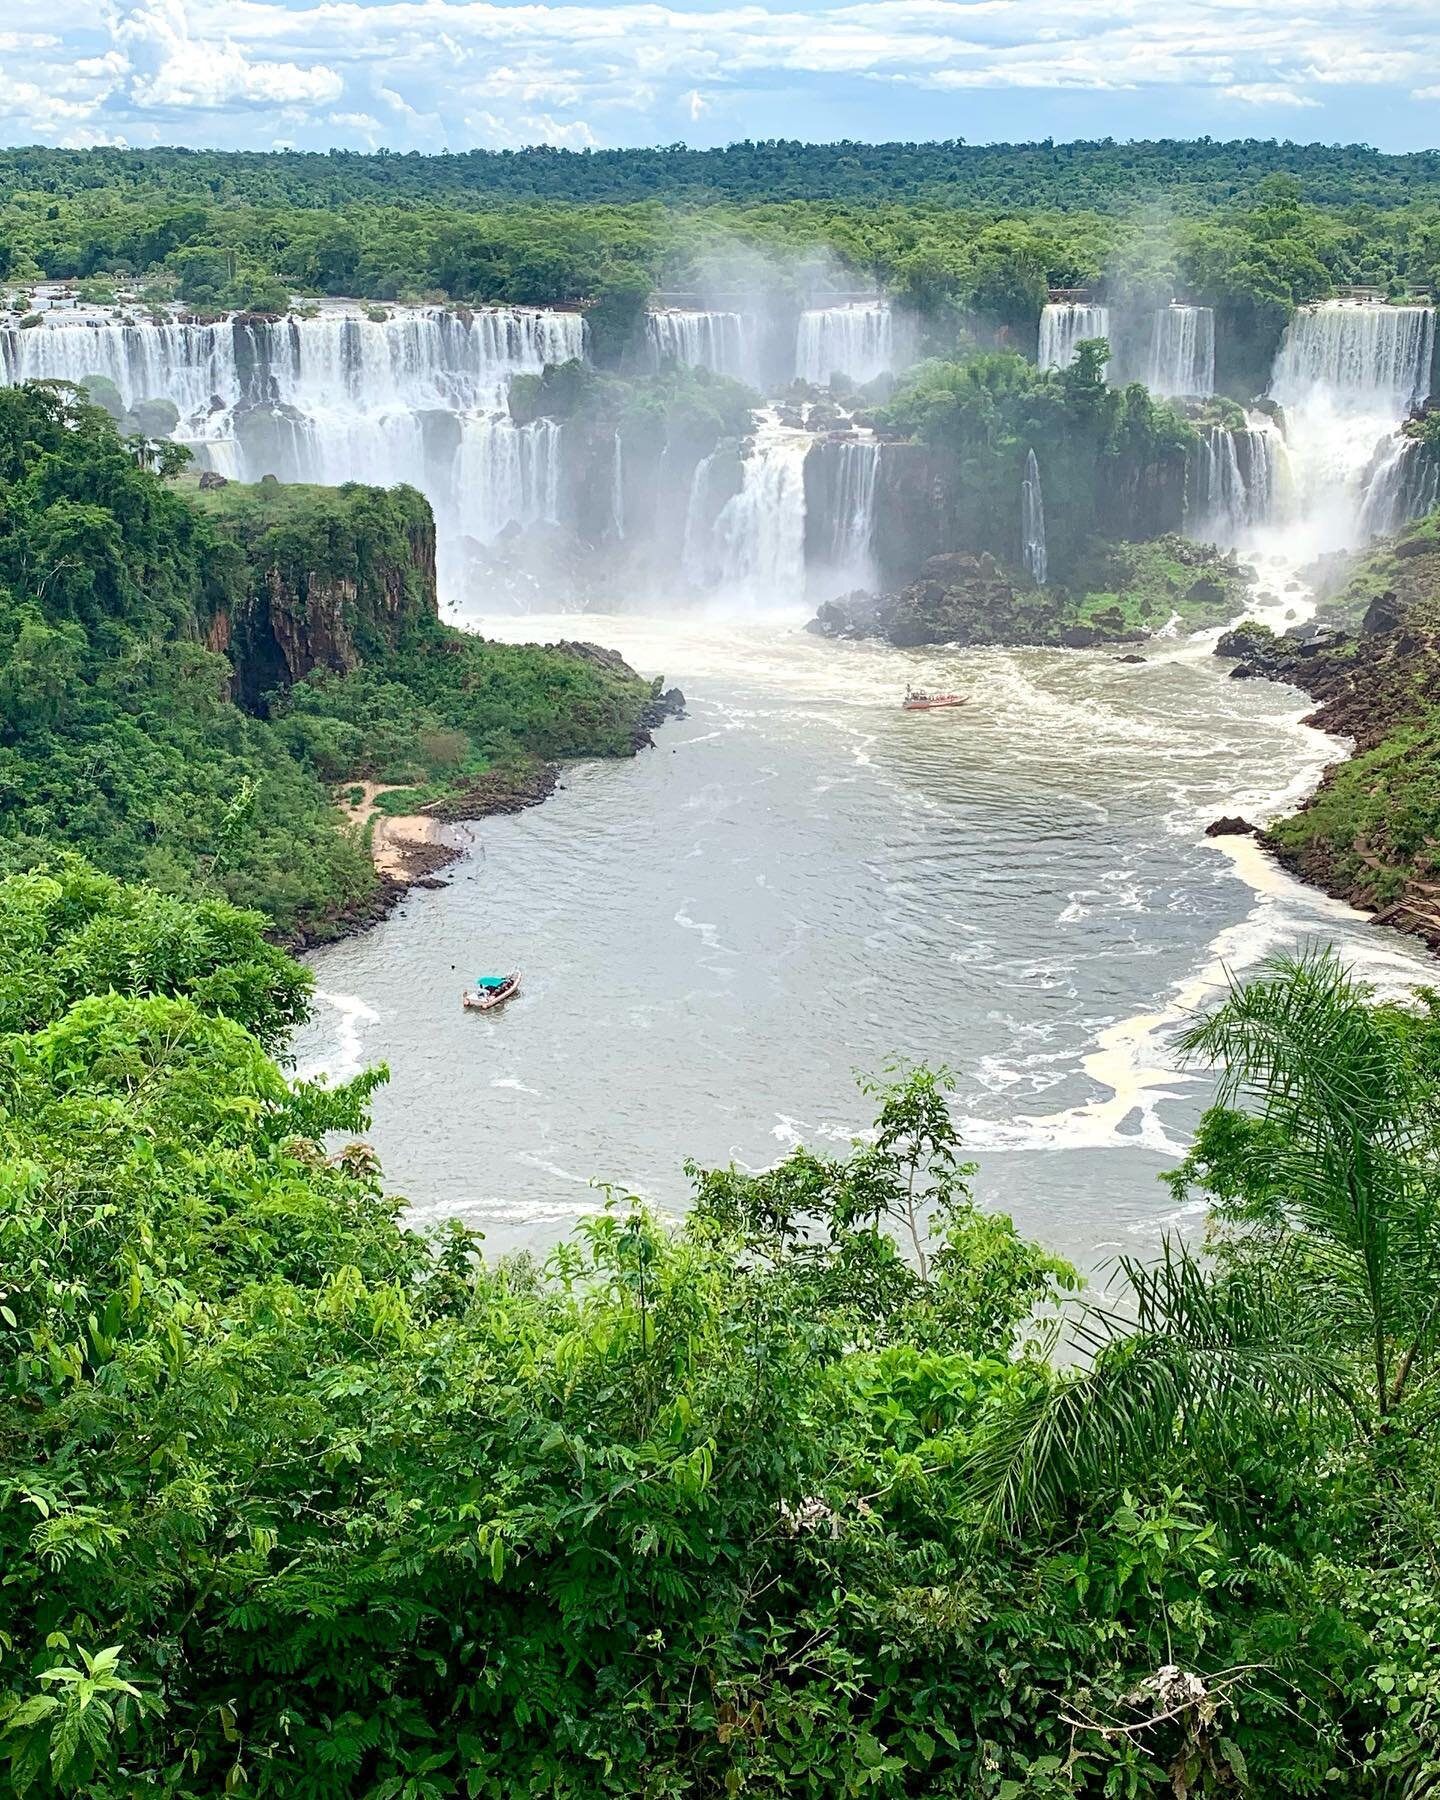 World's largest waterfall system&thinsp;
&thinsp;
Iguaz&uacute; Falls is almost 3 kilometers wide. It feeds the River Paran&aacute; (2nd largest river in South America, after Amazon). There are also many nearby falls worth visiting (Nacunday, Monday,